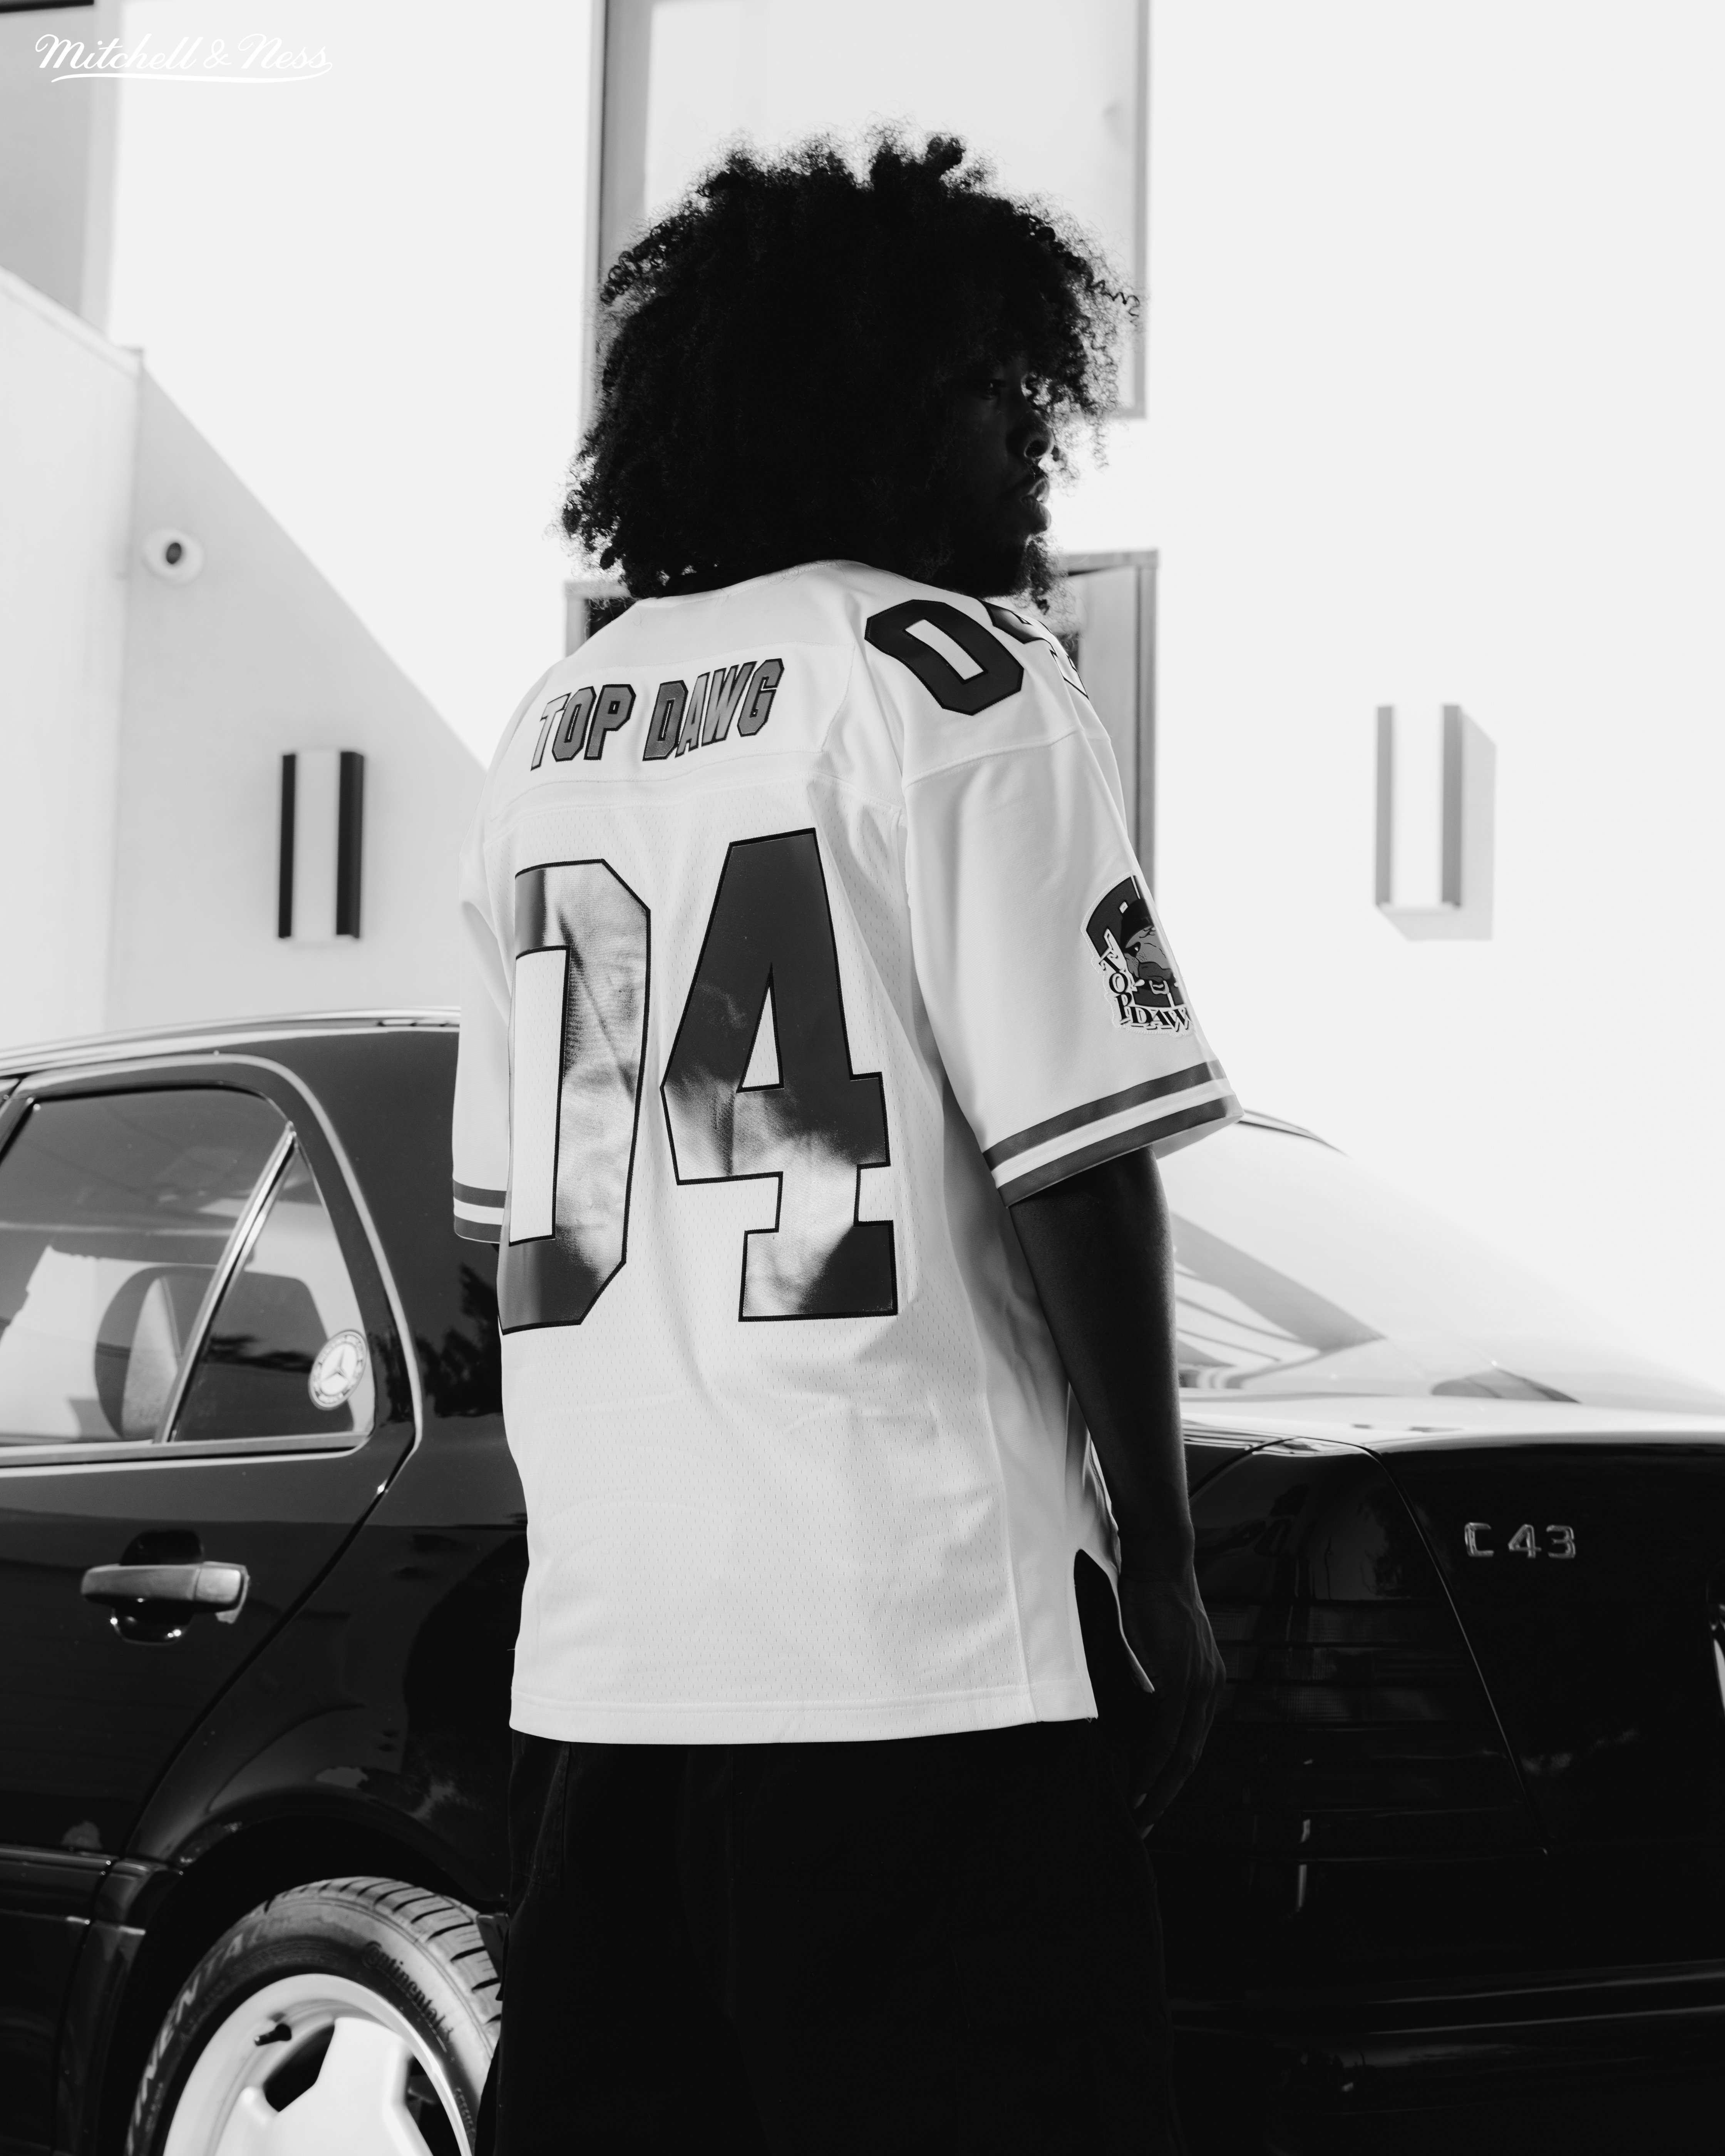 Mitchell & Ness Rap Jersey - Top Dawg